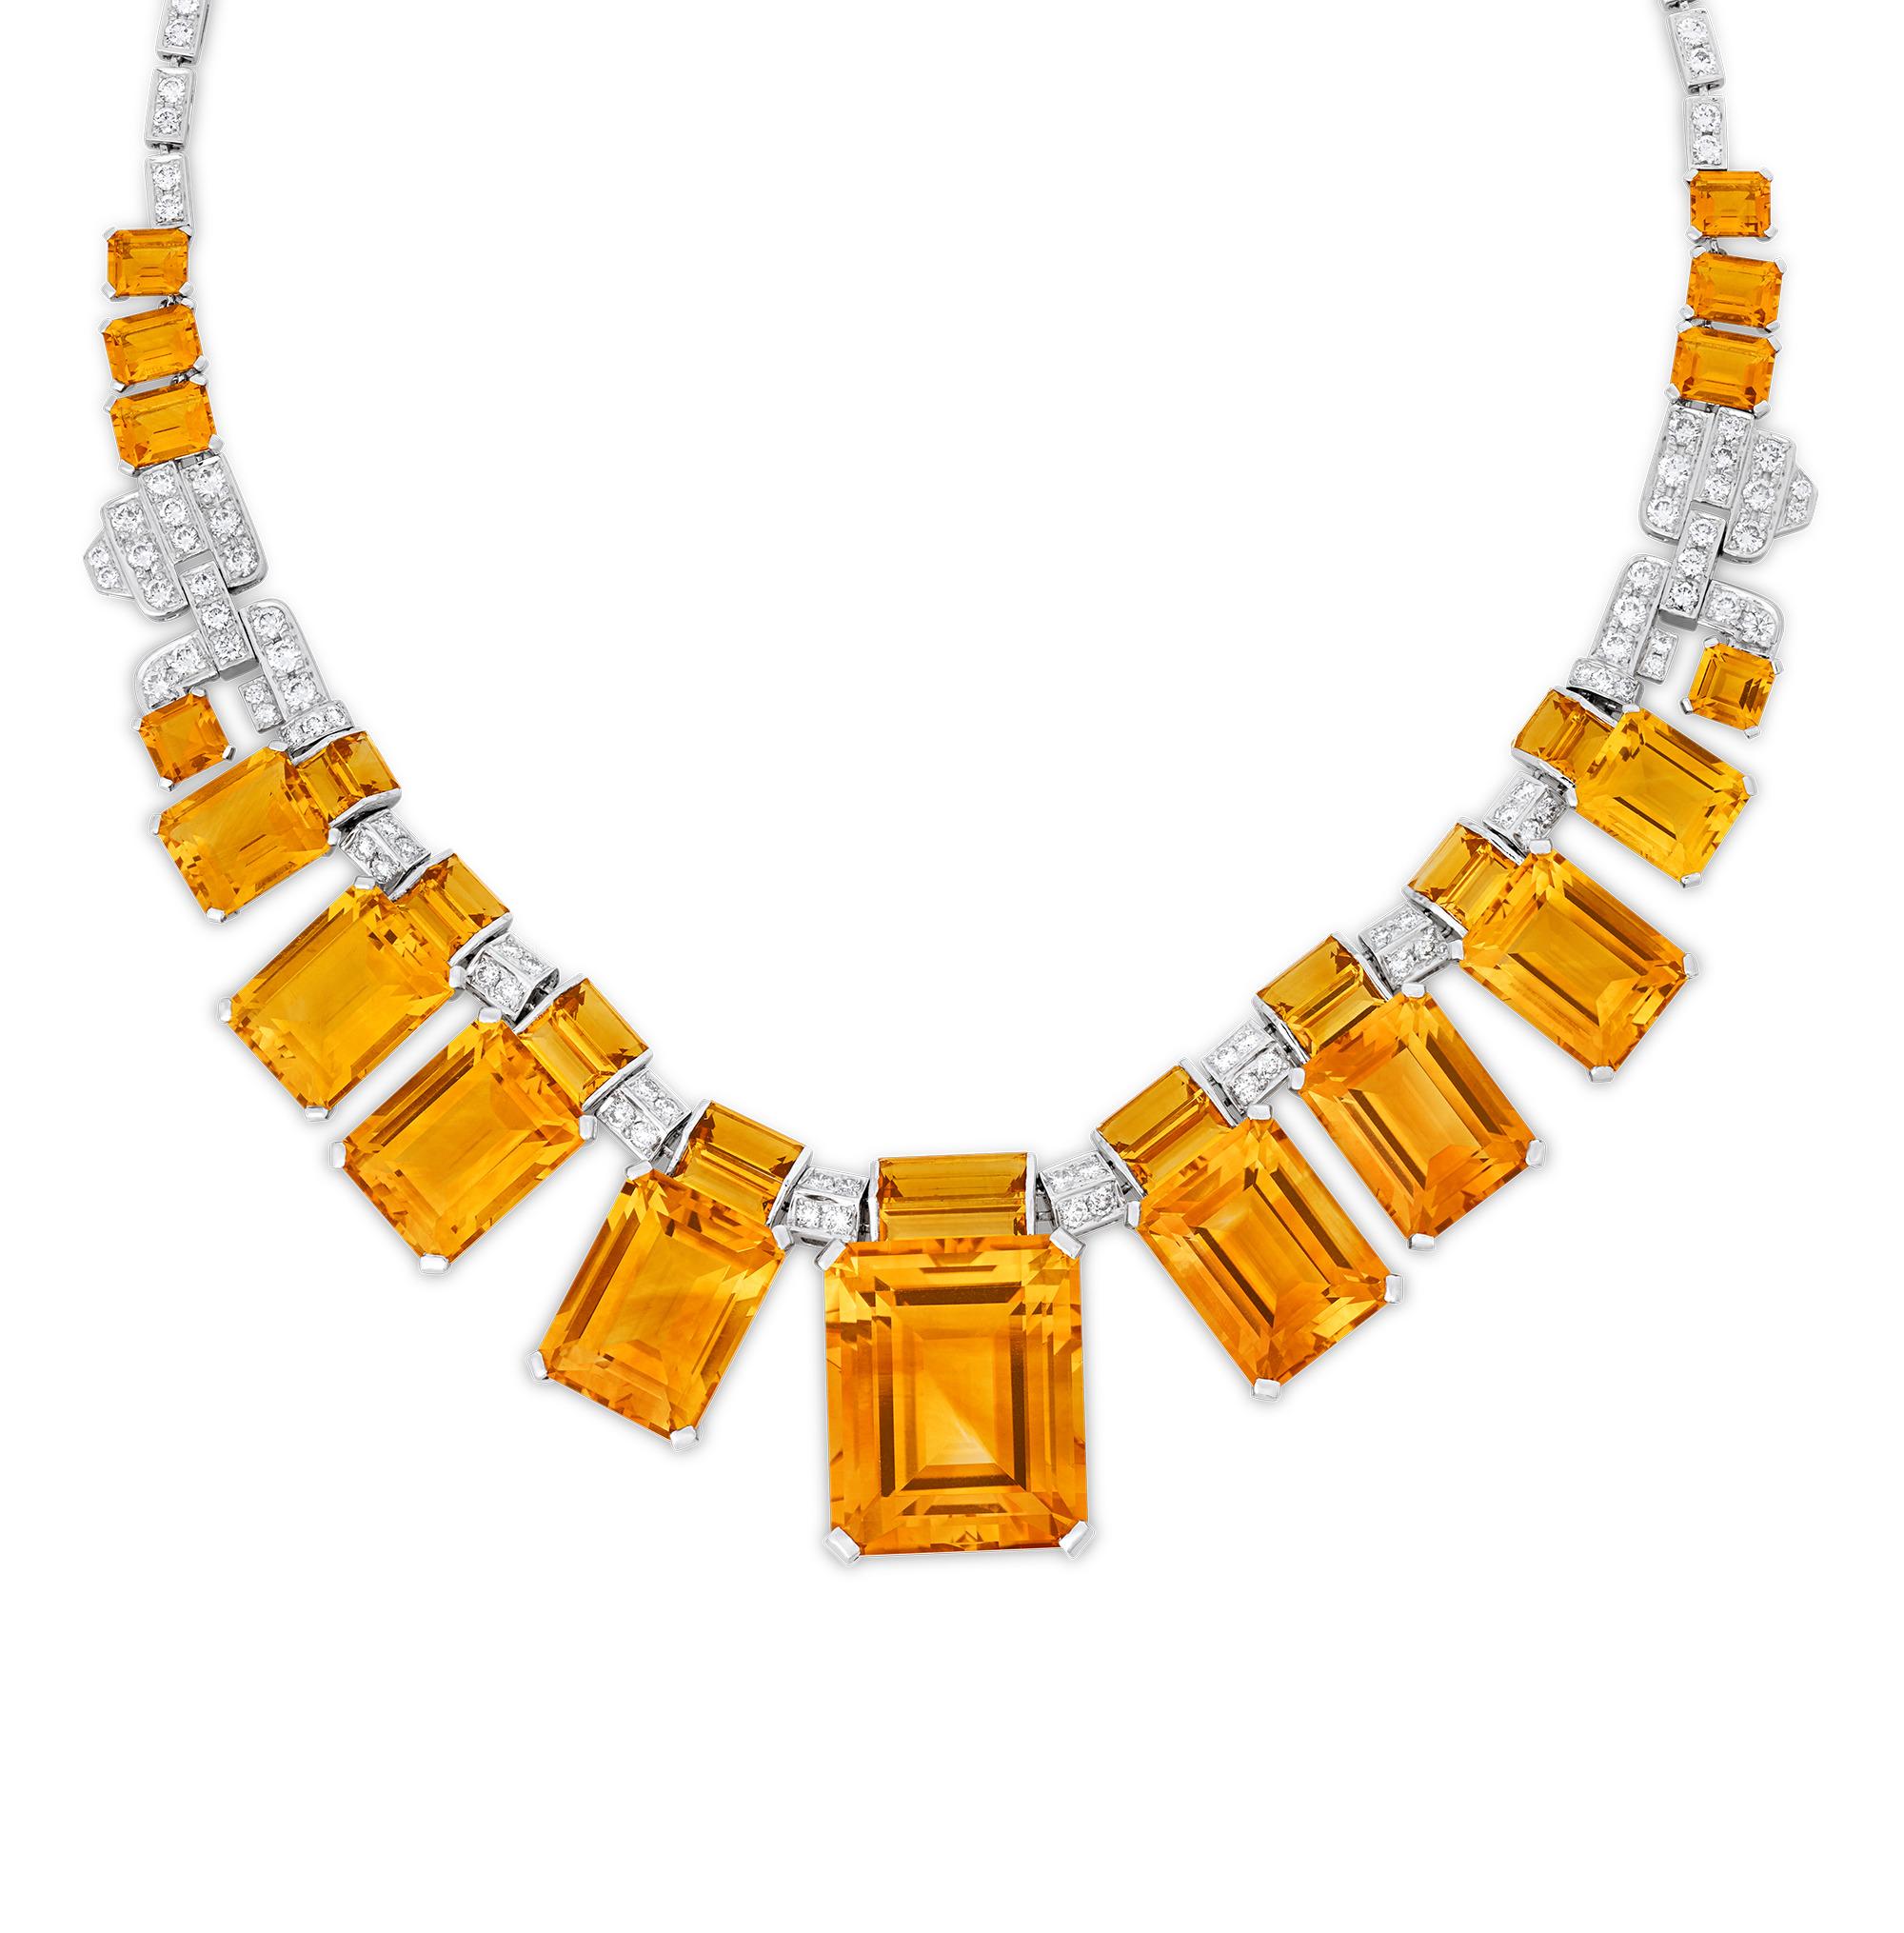 This monumental citrine and diamond necklace creates a striking visual effect across the neck. The citrine gemstones, totaling over 150.00 carats, offer a vibrant sunny hue, and are interspersed with glittering white diamonds totaling approximately